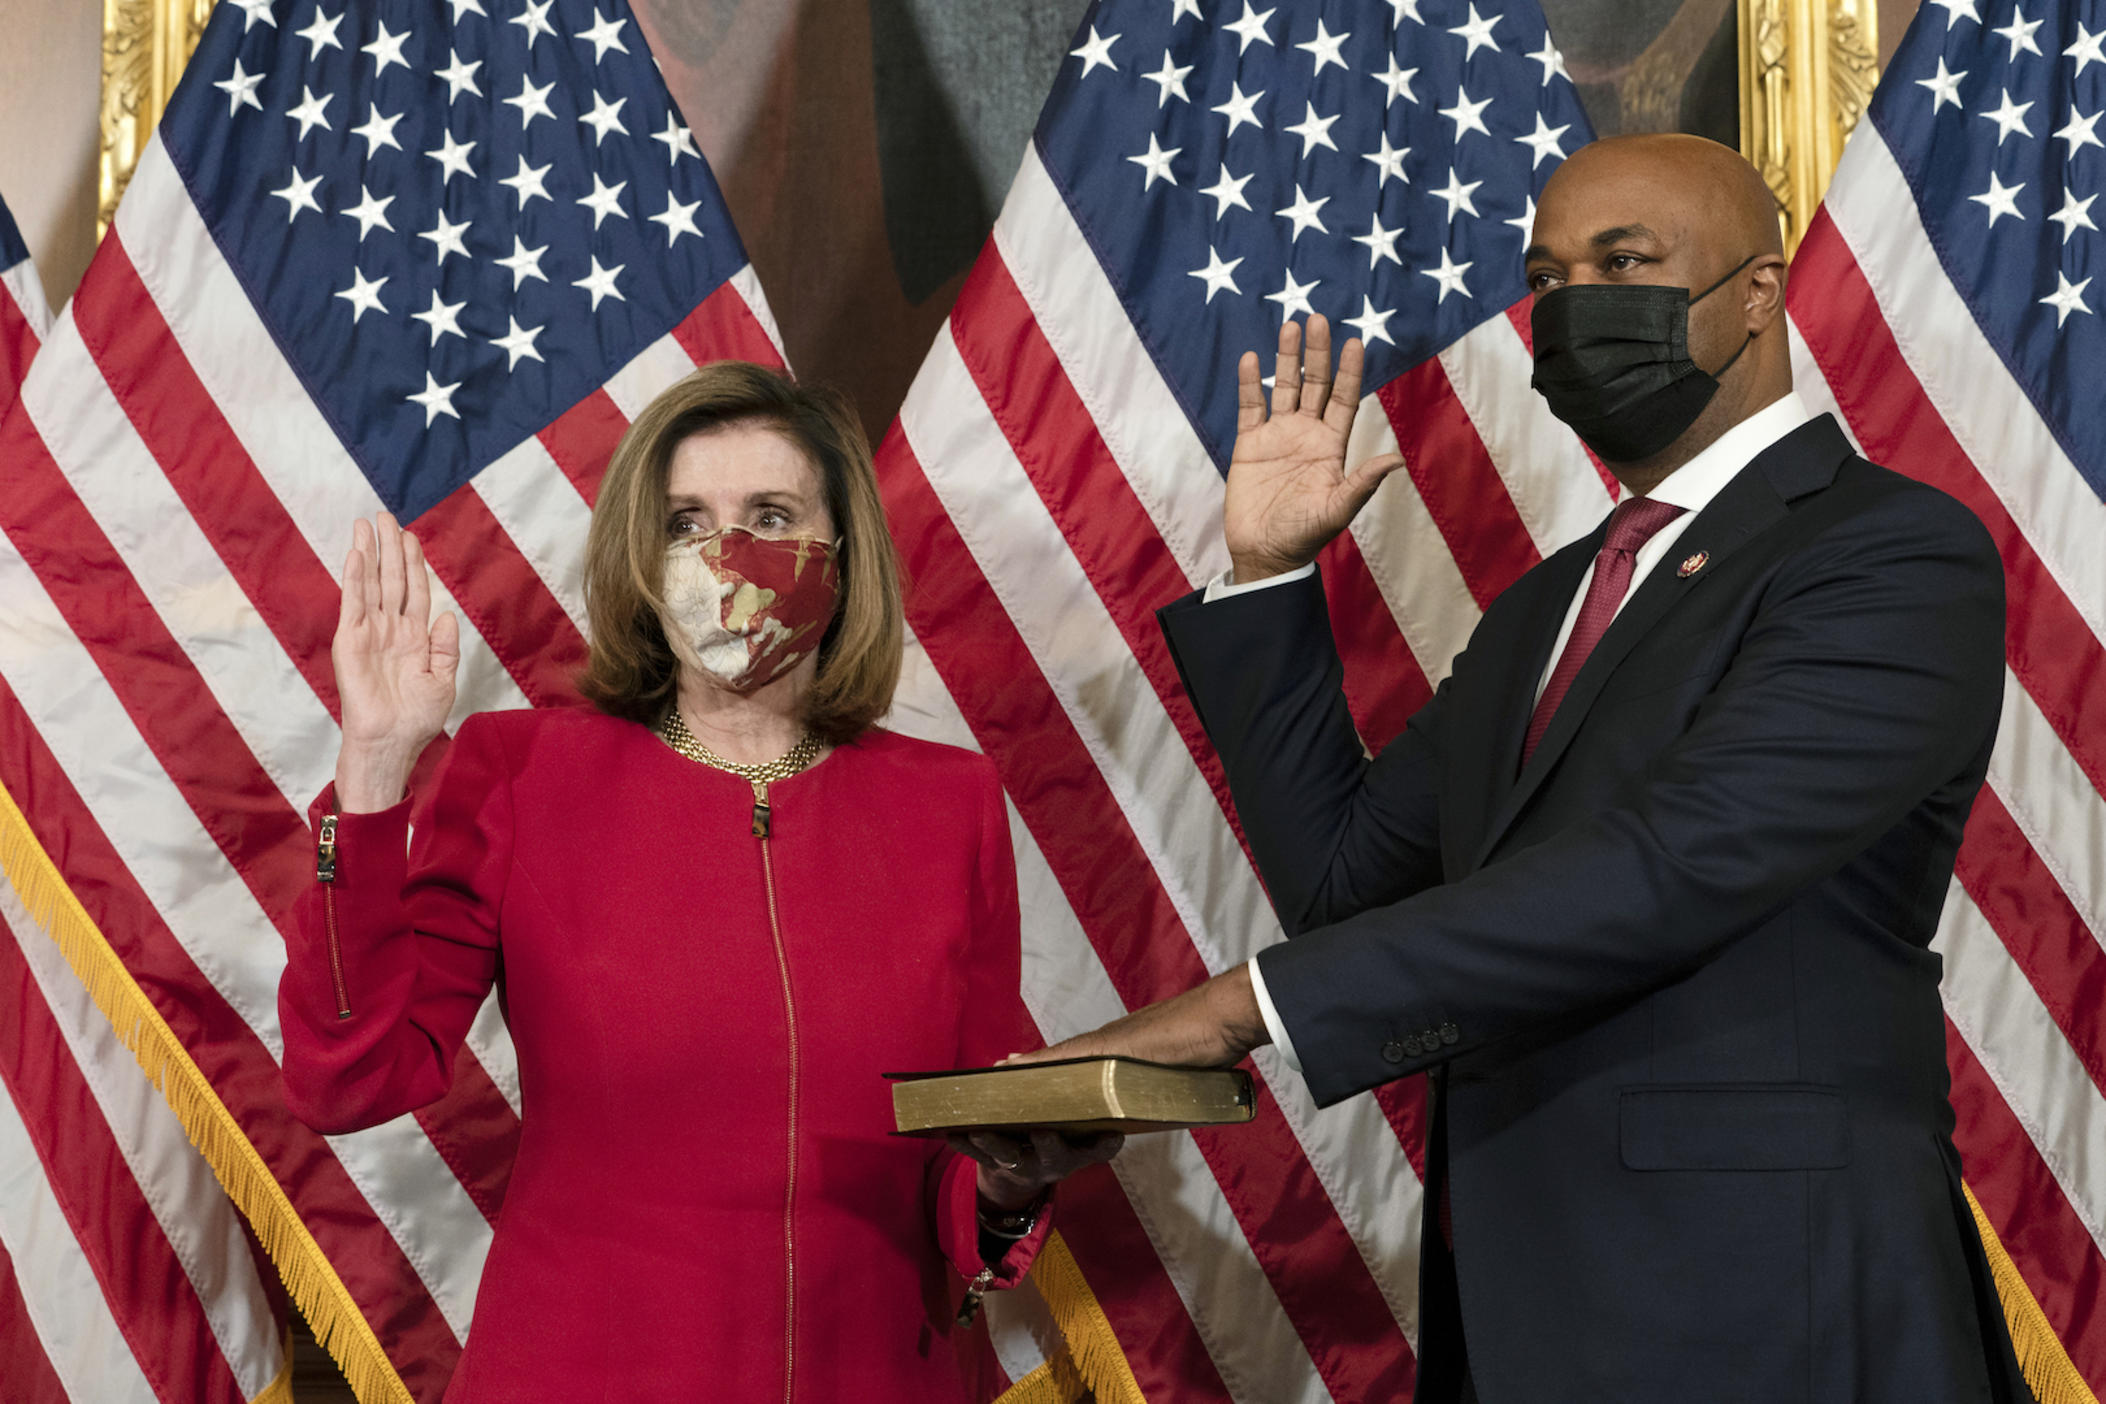 House Speaker Nancy Pelosi, of Calif., holds a ceremonial swearing-in of Rep. Kwanza Hall, D-Ga., on Capitol Hill, Thursday, Dec. 3, 2020, in Washington. Hall will serve the remaining term of the late Rep. John Lewis. (AP Photo/Jacquelyn Martin)